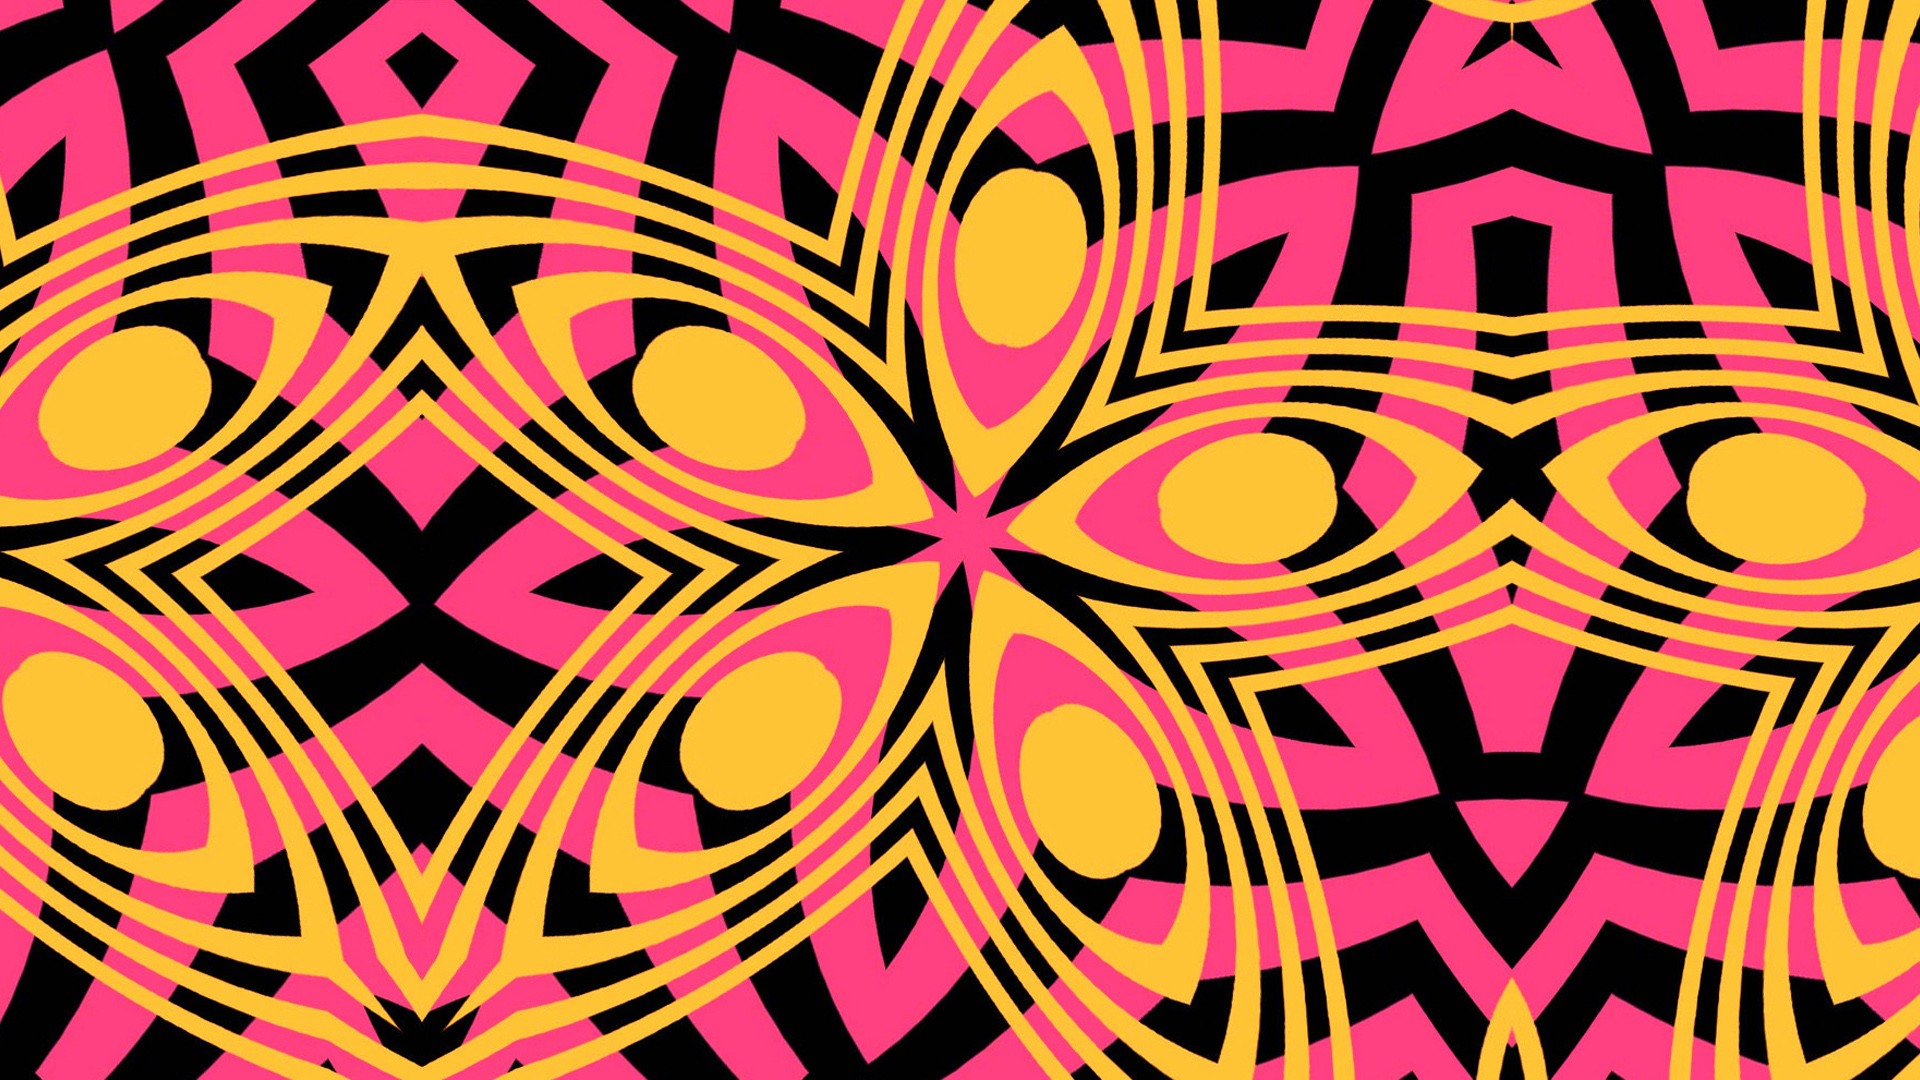 Abstract Artistic Colorful Colors Digital Art Kaleidoscope Pattern Pink Yellow 1920x1080